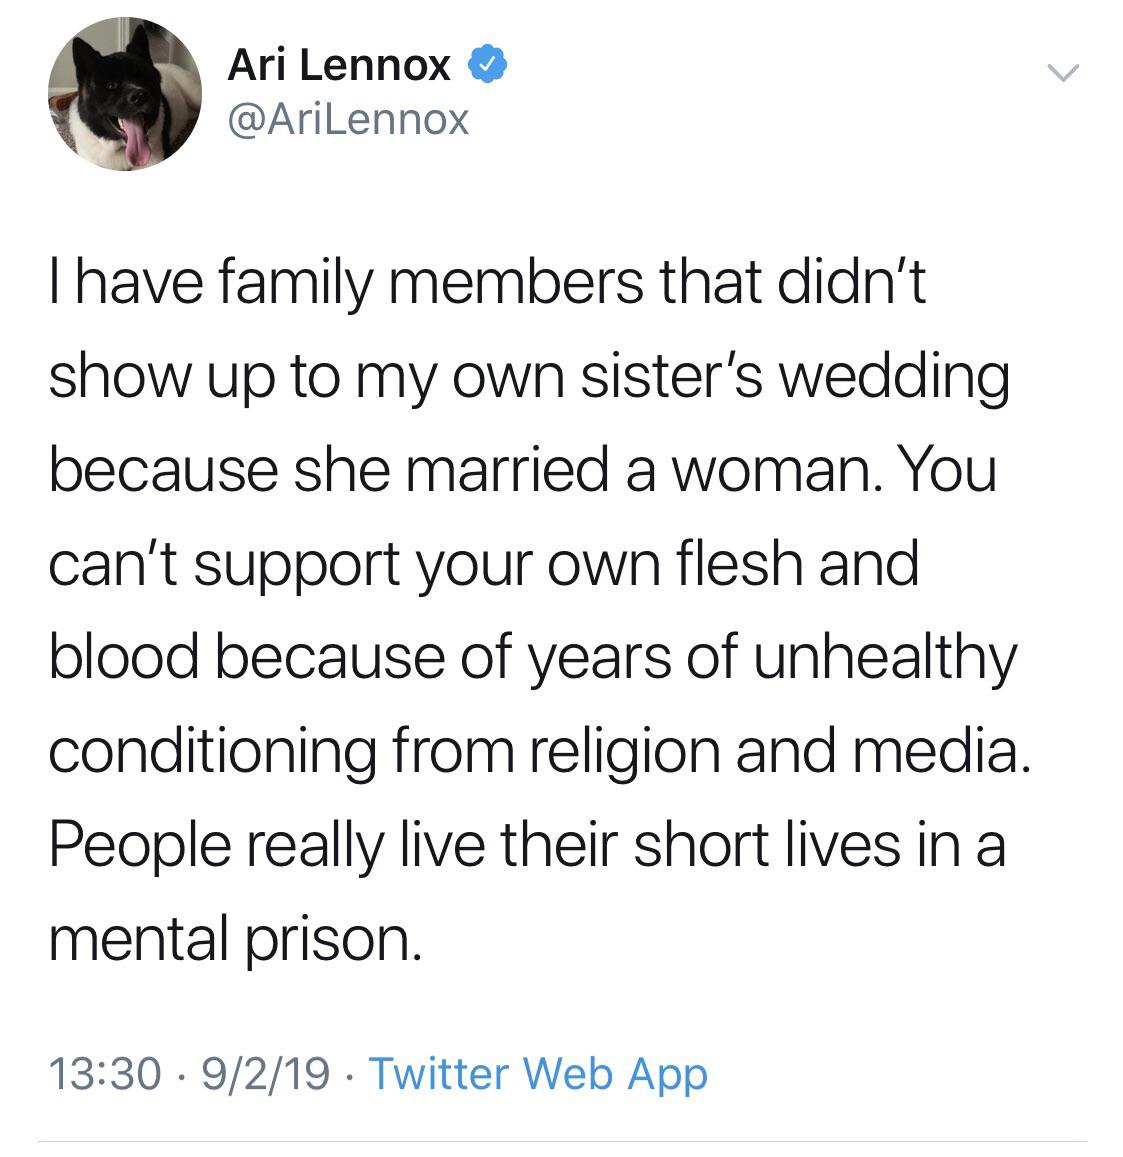 tweets black-twitter-memes tweets text: Ari Lennox @AriLennox I have family members that didn't show up to my own sister's wedding because she married a woman. You can't support your own flesh and blood because of years of unhealthy conditioning from religion and media. People really live their short lives in a mental prison. 13:30 • 9/2/19 • Twitter Web App 